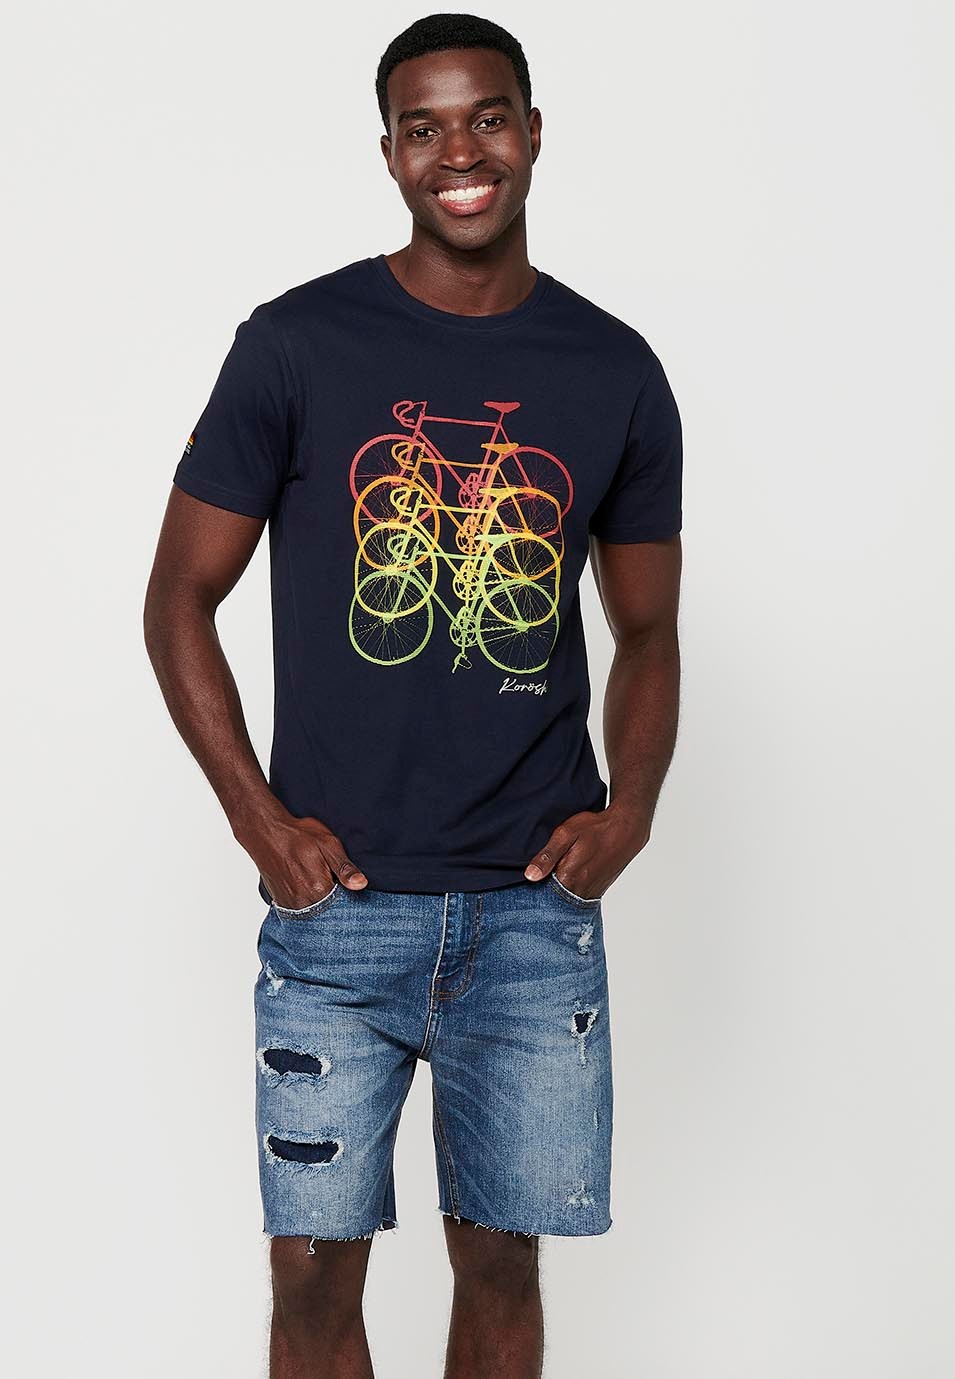 Short-sleeved cotton T-shirt with bicycle front print, navy color for men